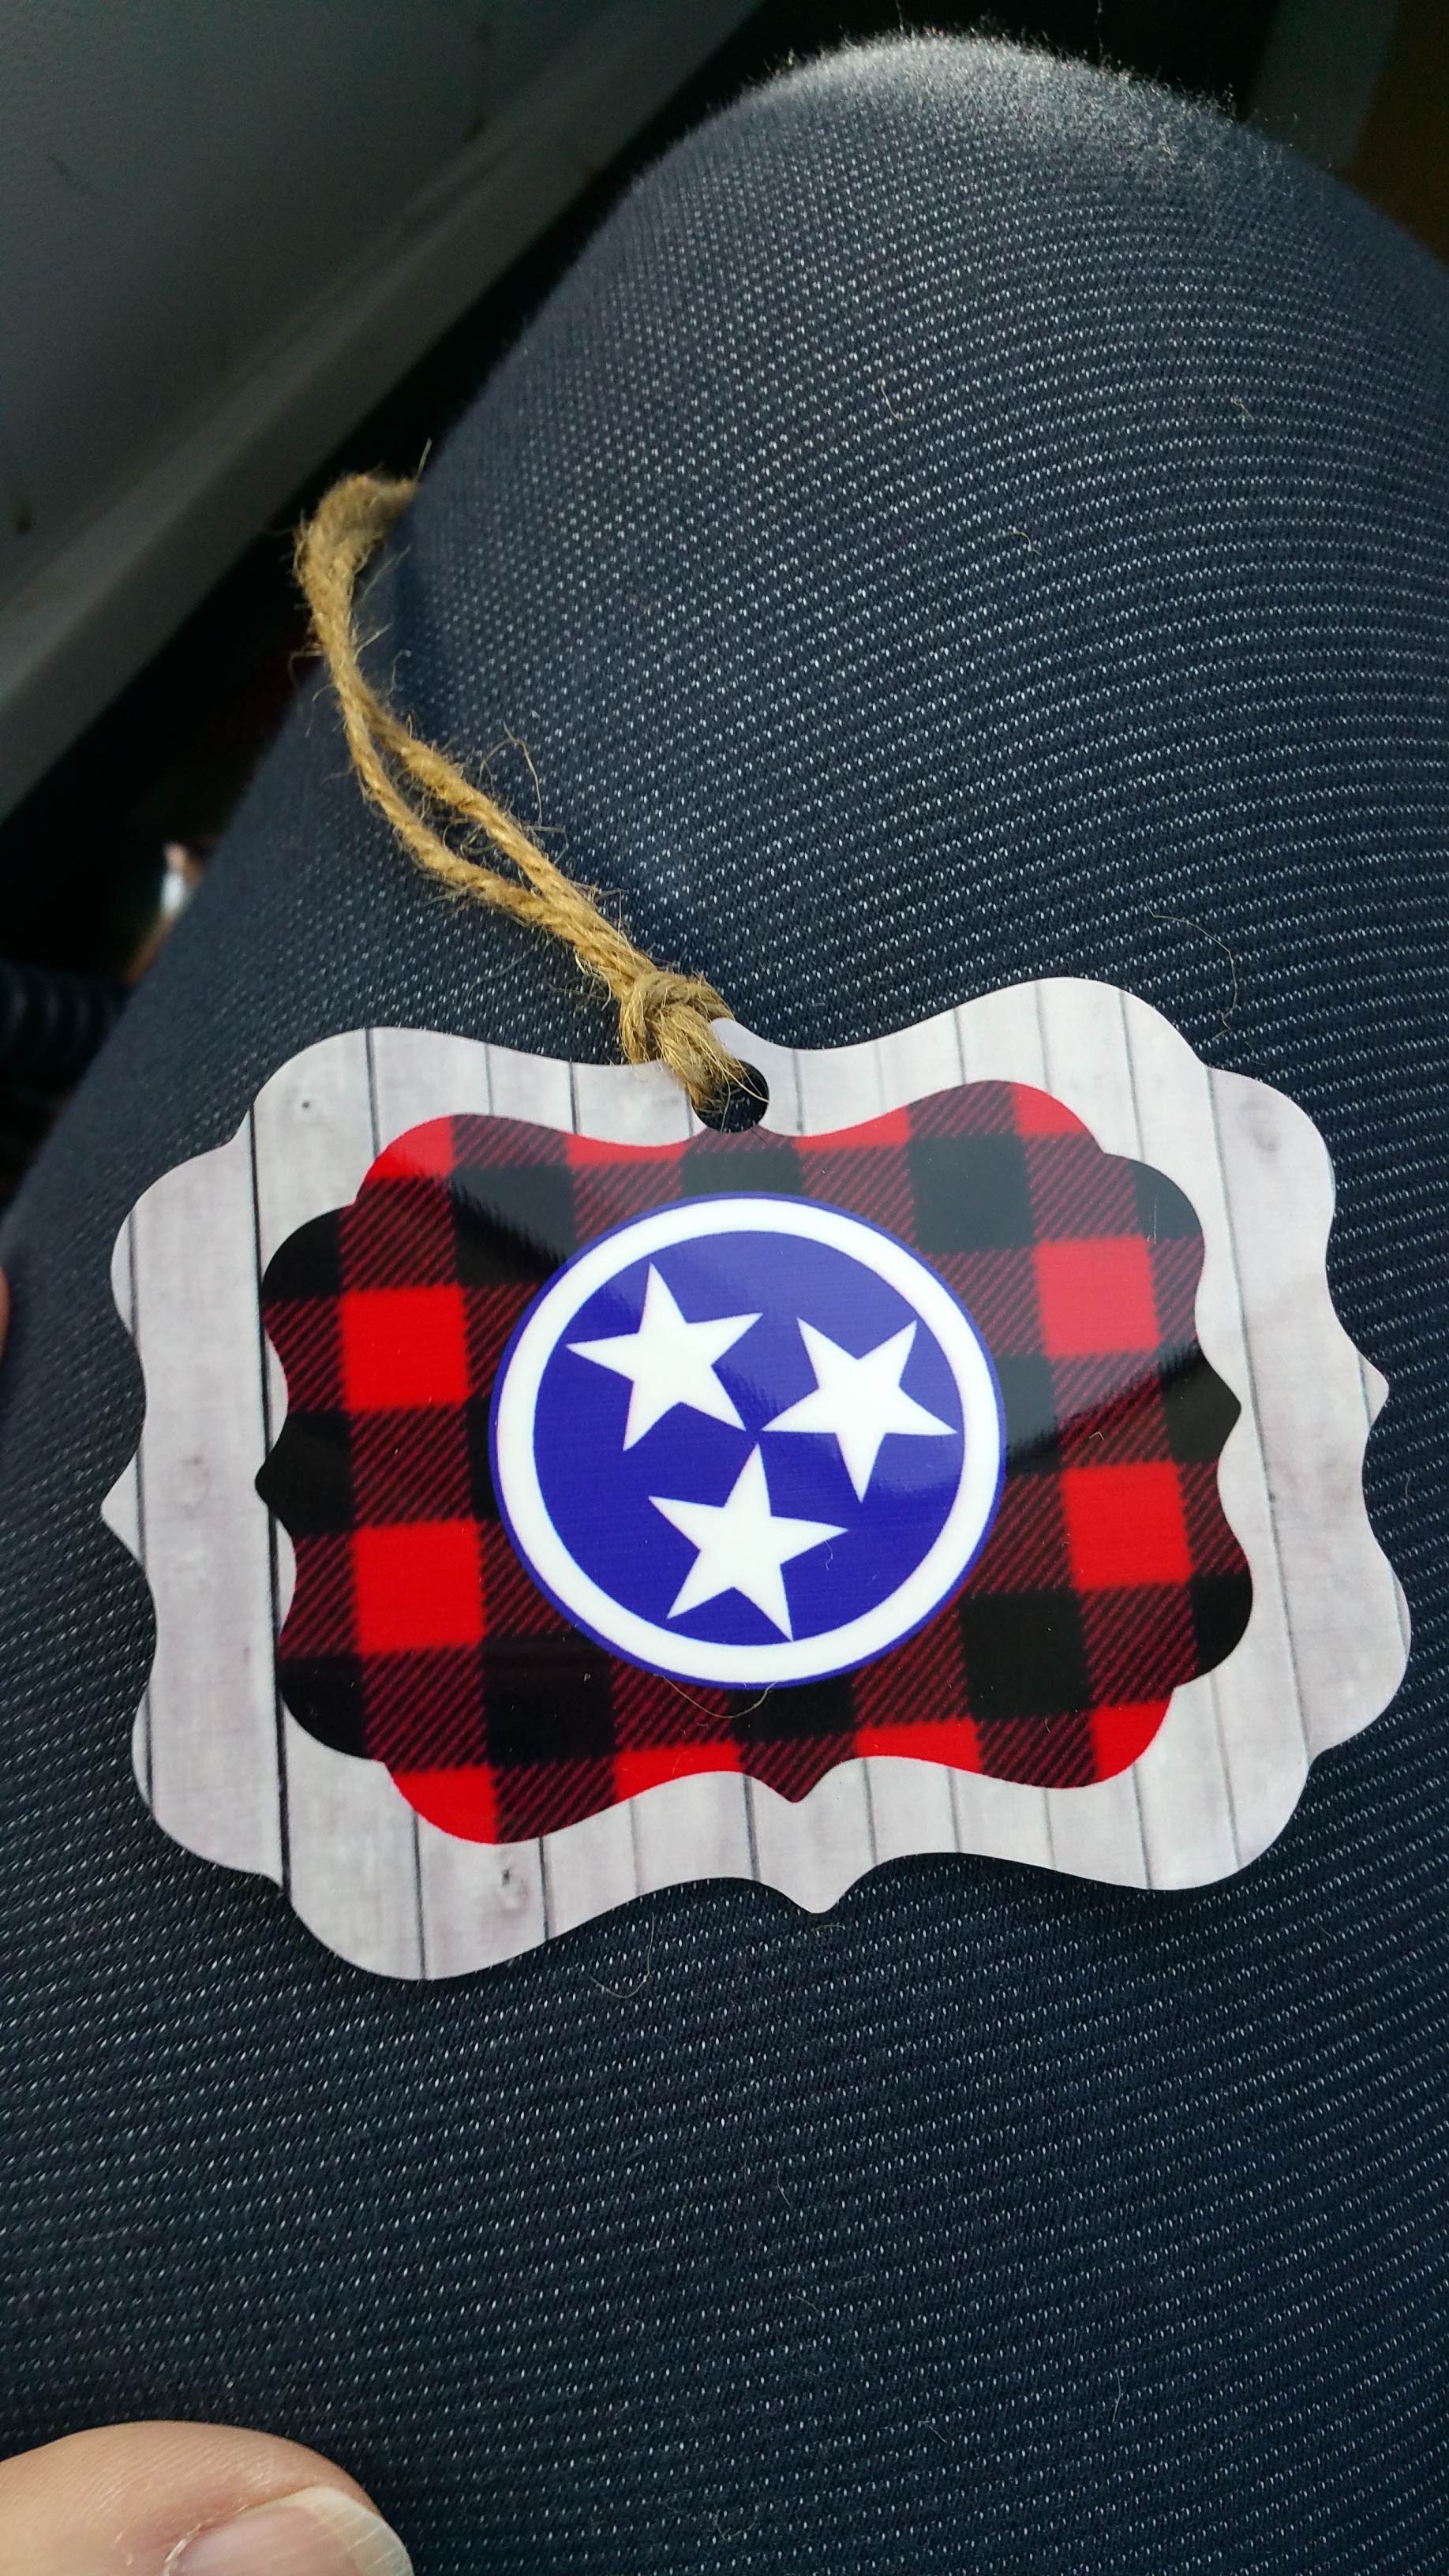 Tri Star ornament made with sublimation printing